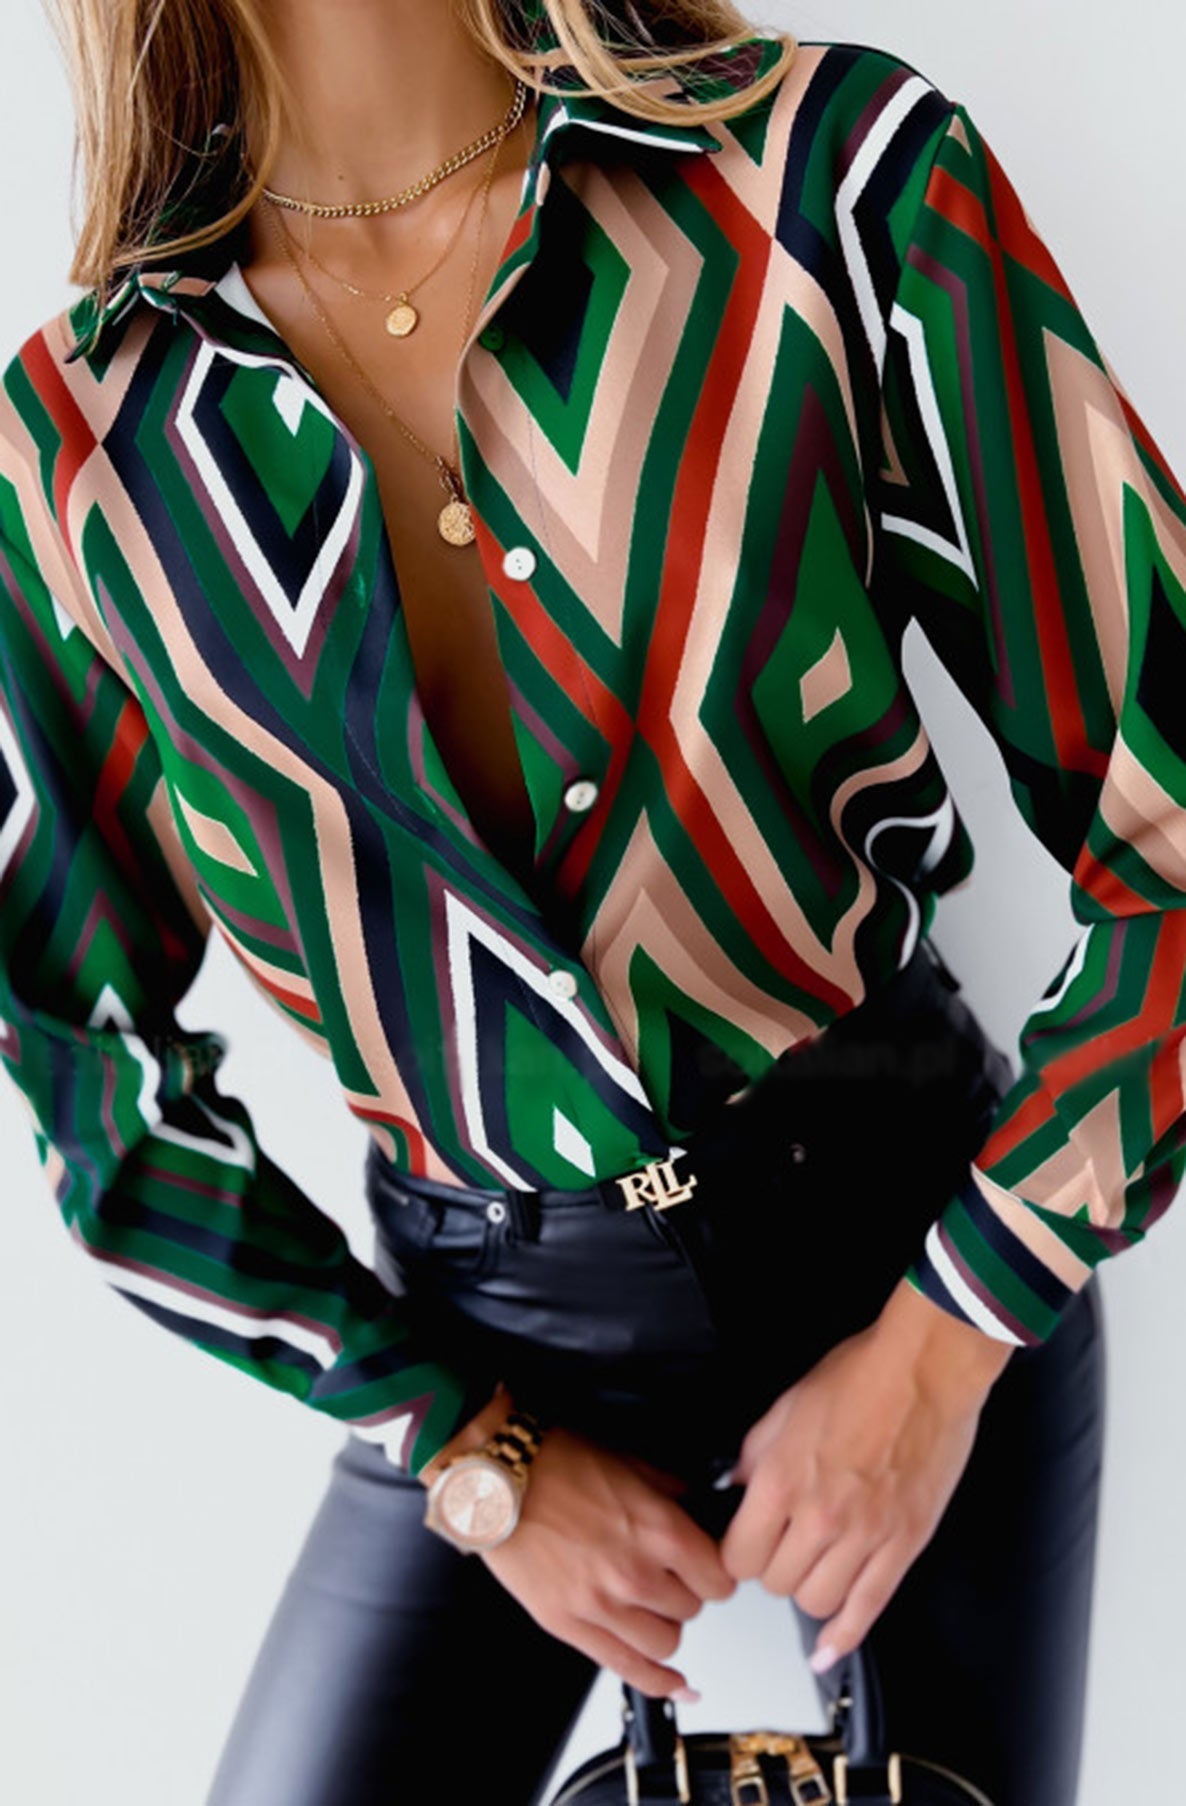 Load image into Gallery viewer, Bree Green Argyle Diamond Print Blouse Shirt Top
